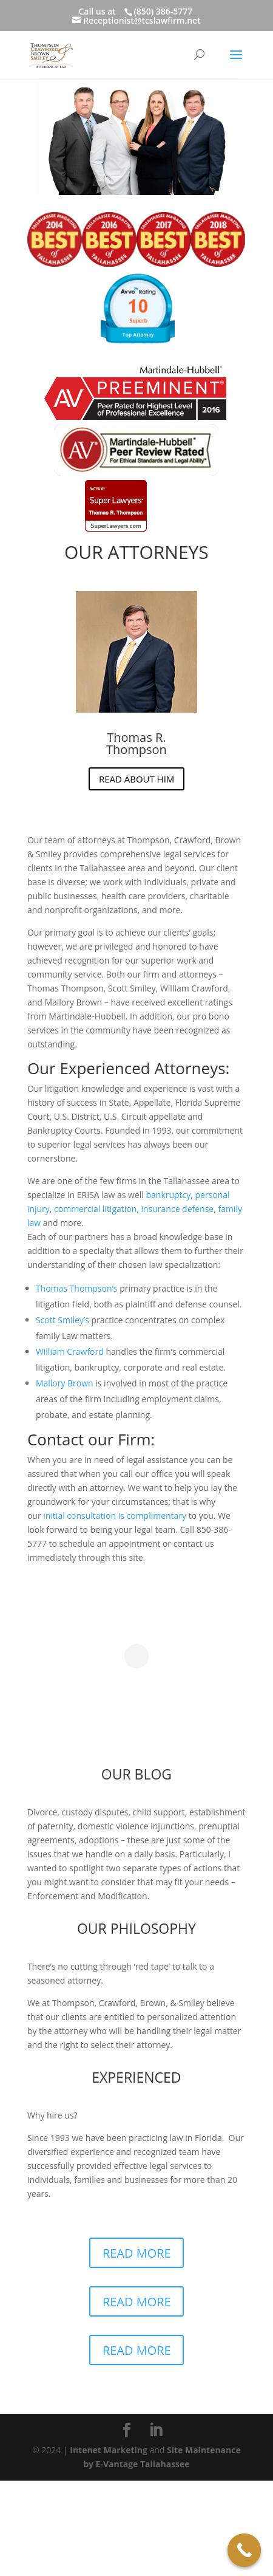 Thompson Crawford & Smiley PA - Tallahassee FL Lawyers